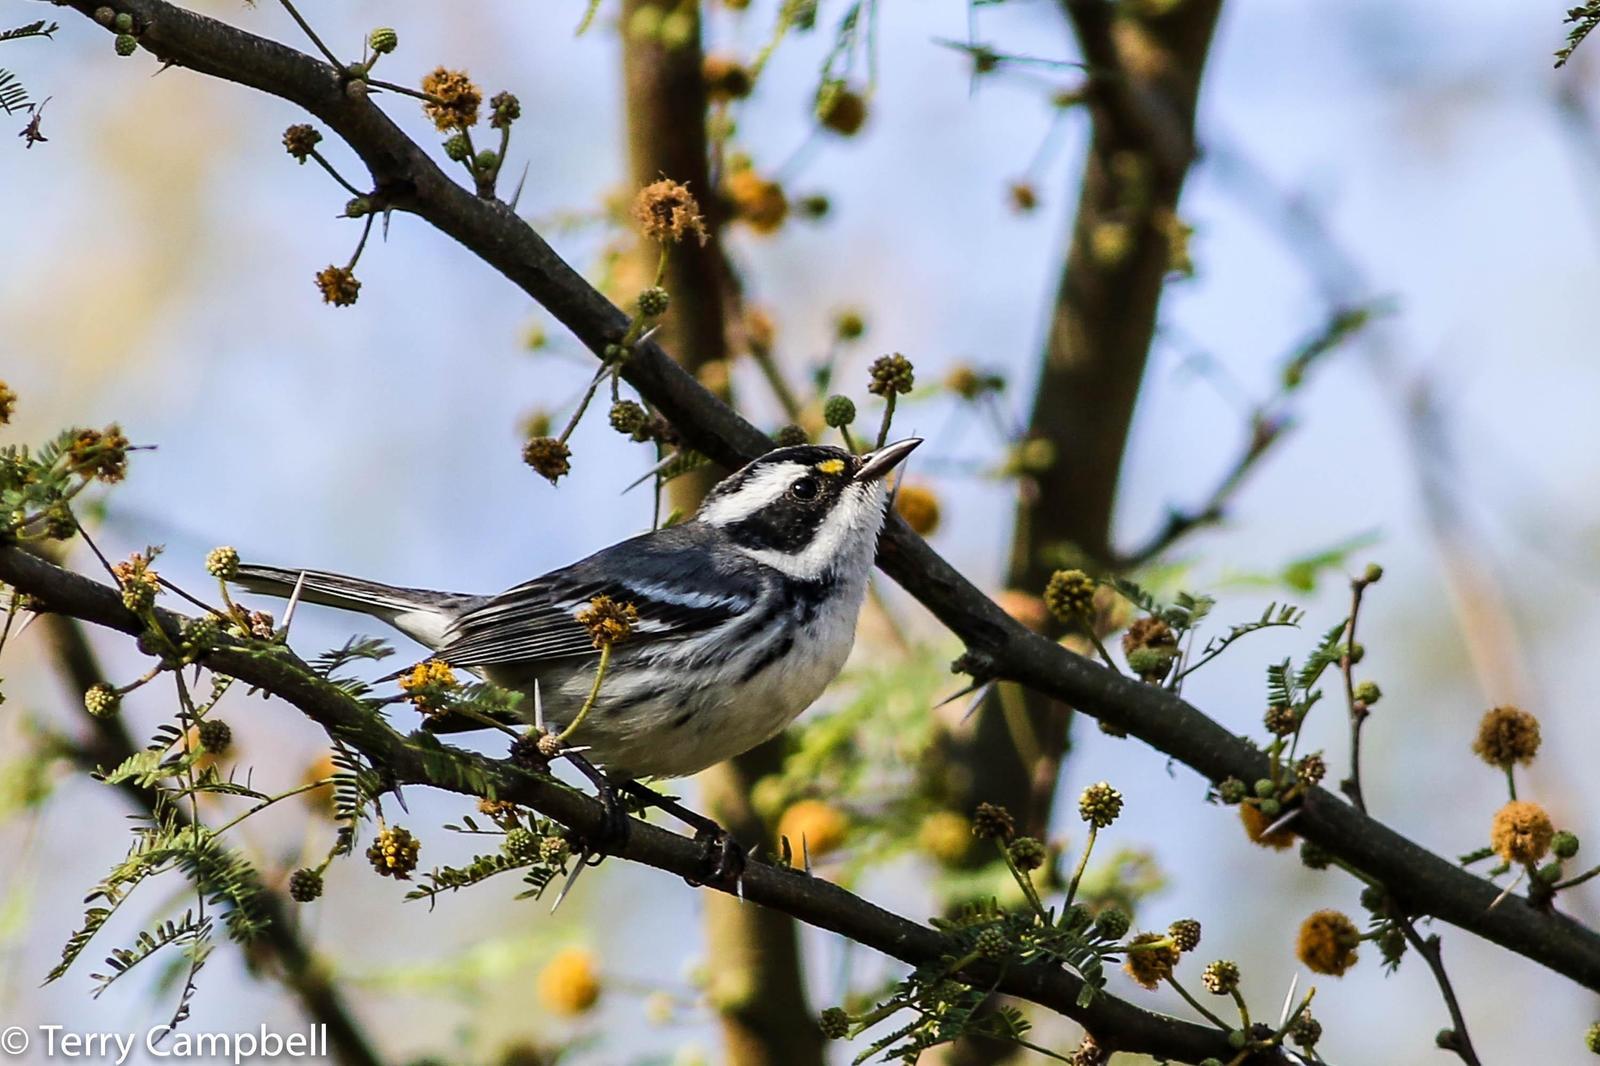 Black-throated Gray Warbler Photo by Terry Campbell